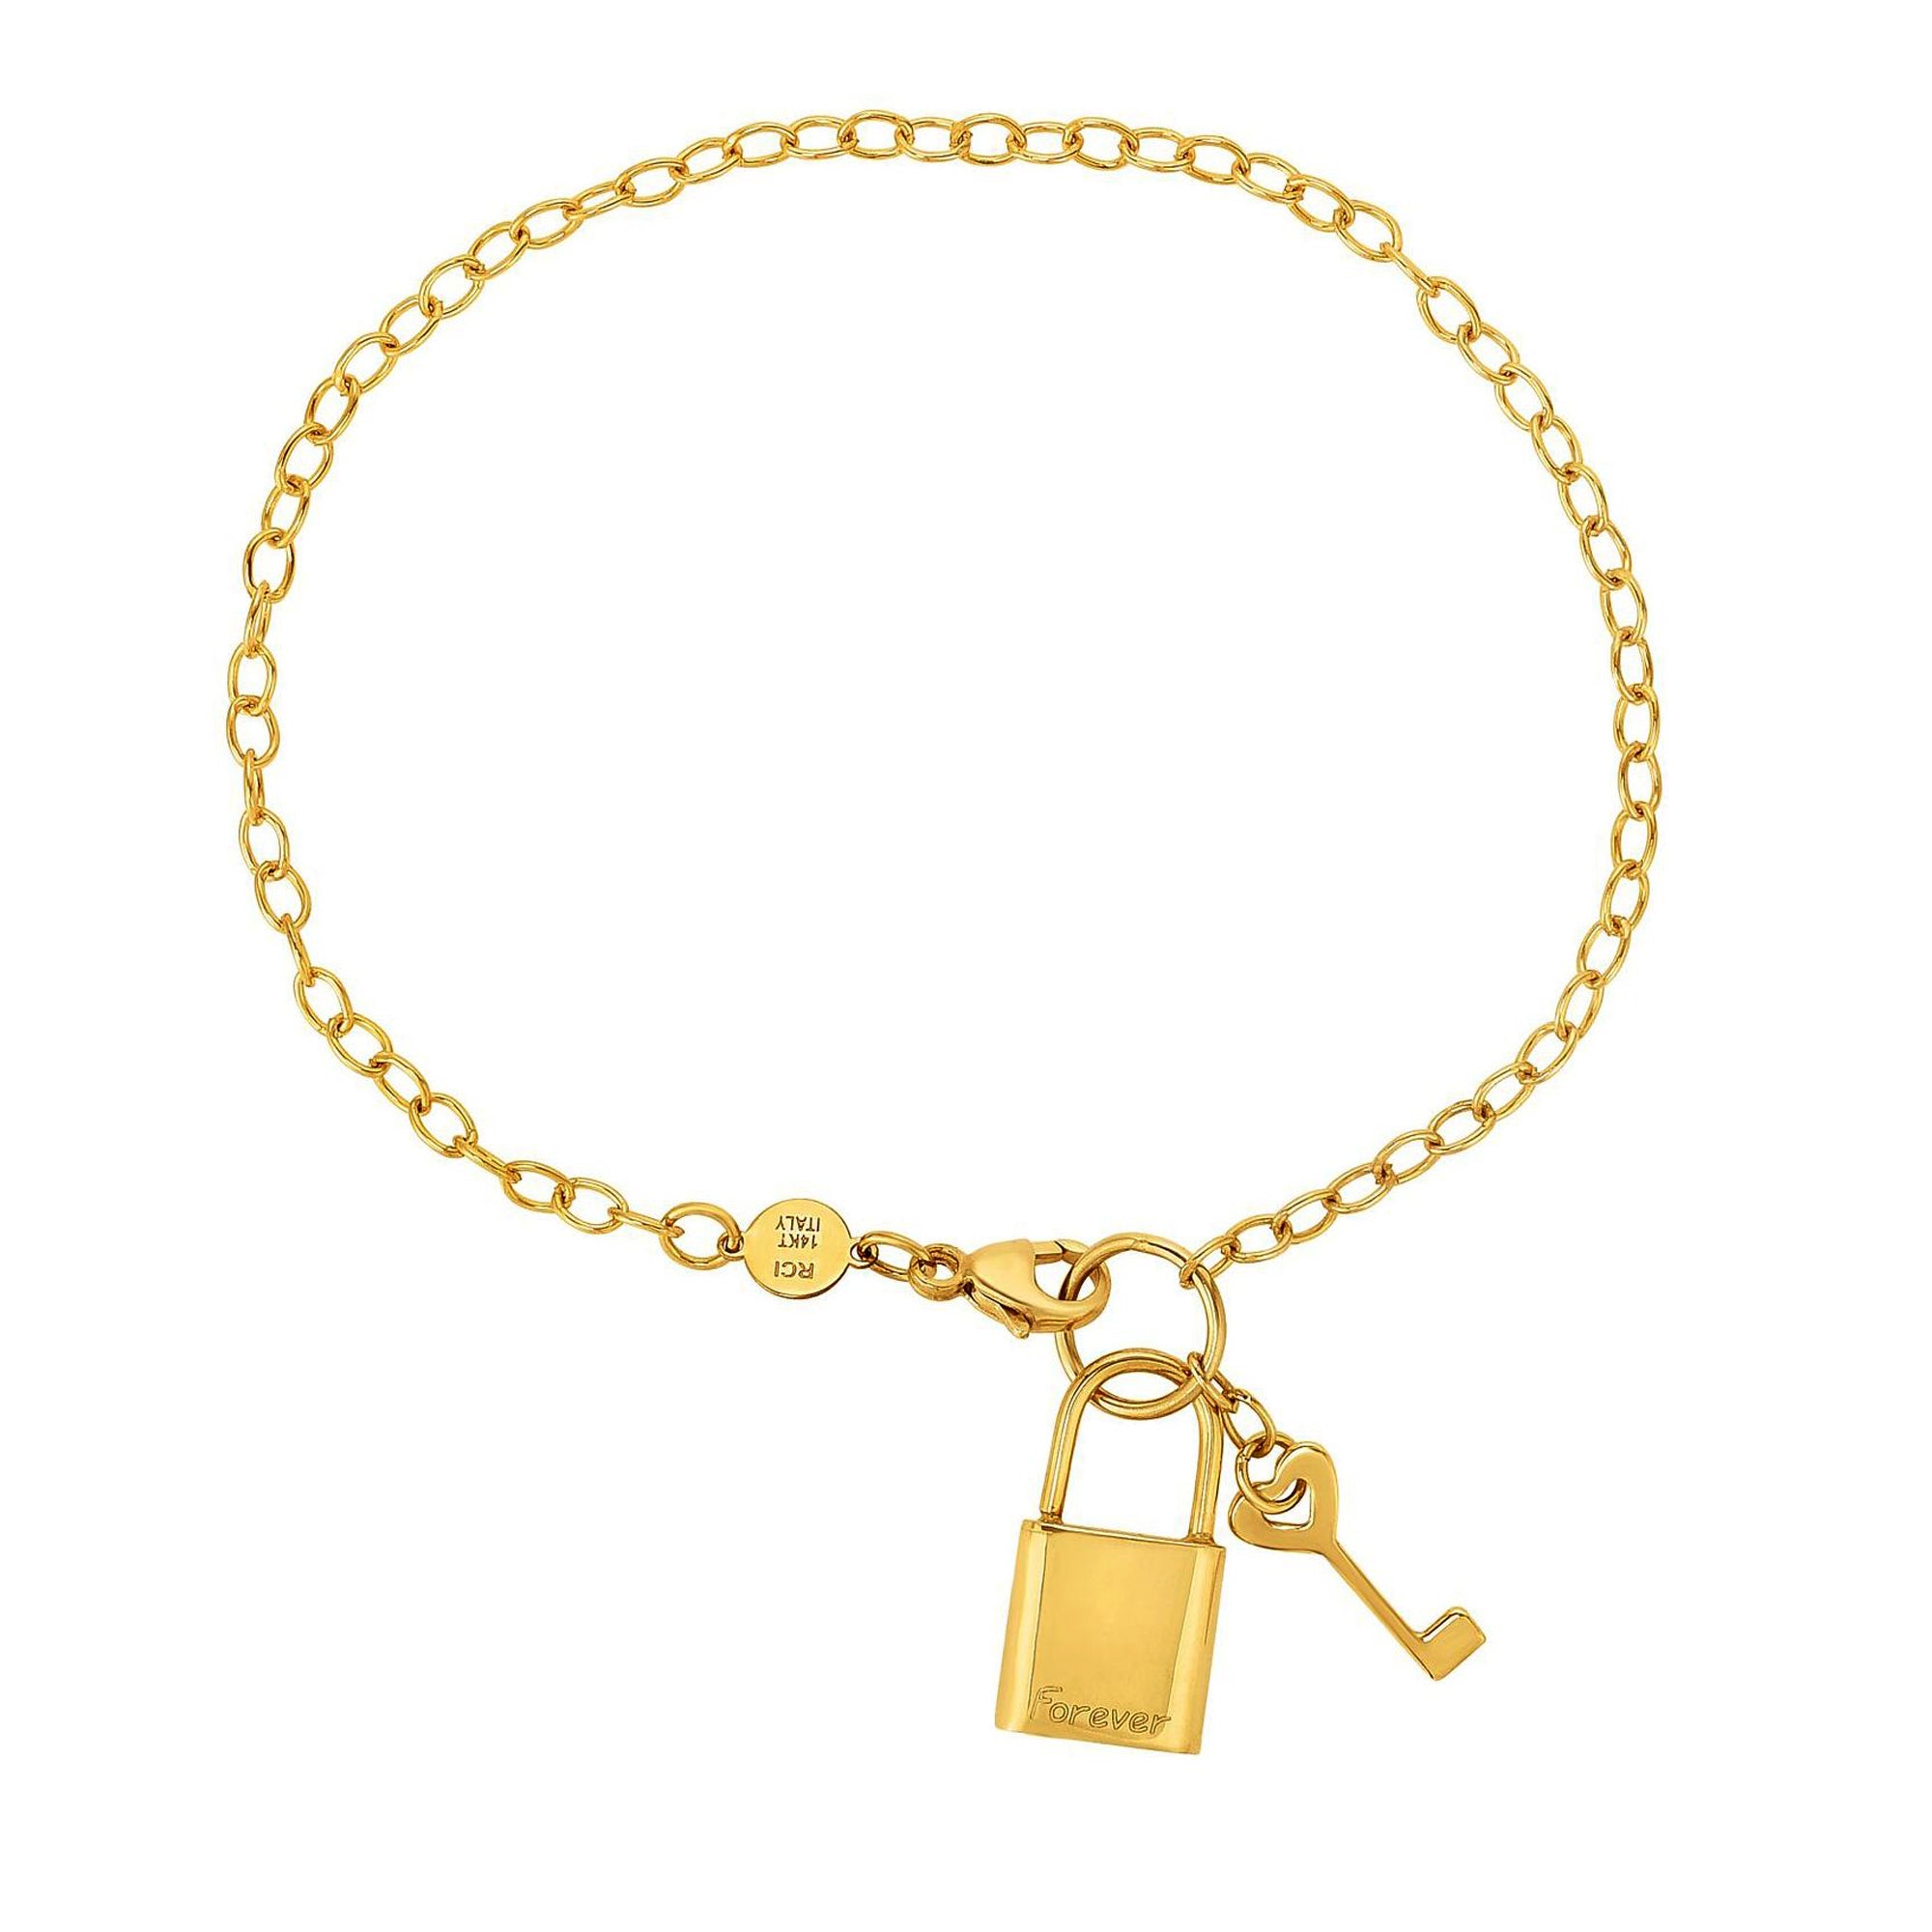 14k Yellow Gold Chain Lock And Key Bracelet, 7.5" fine designer jewelry for men and women